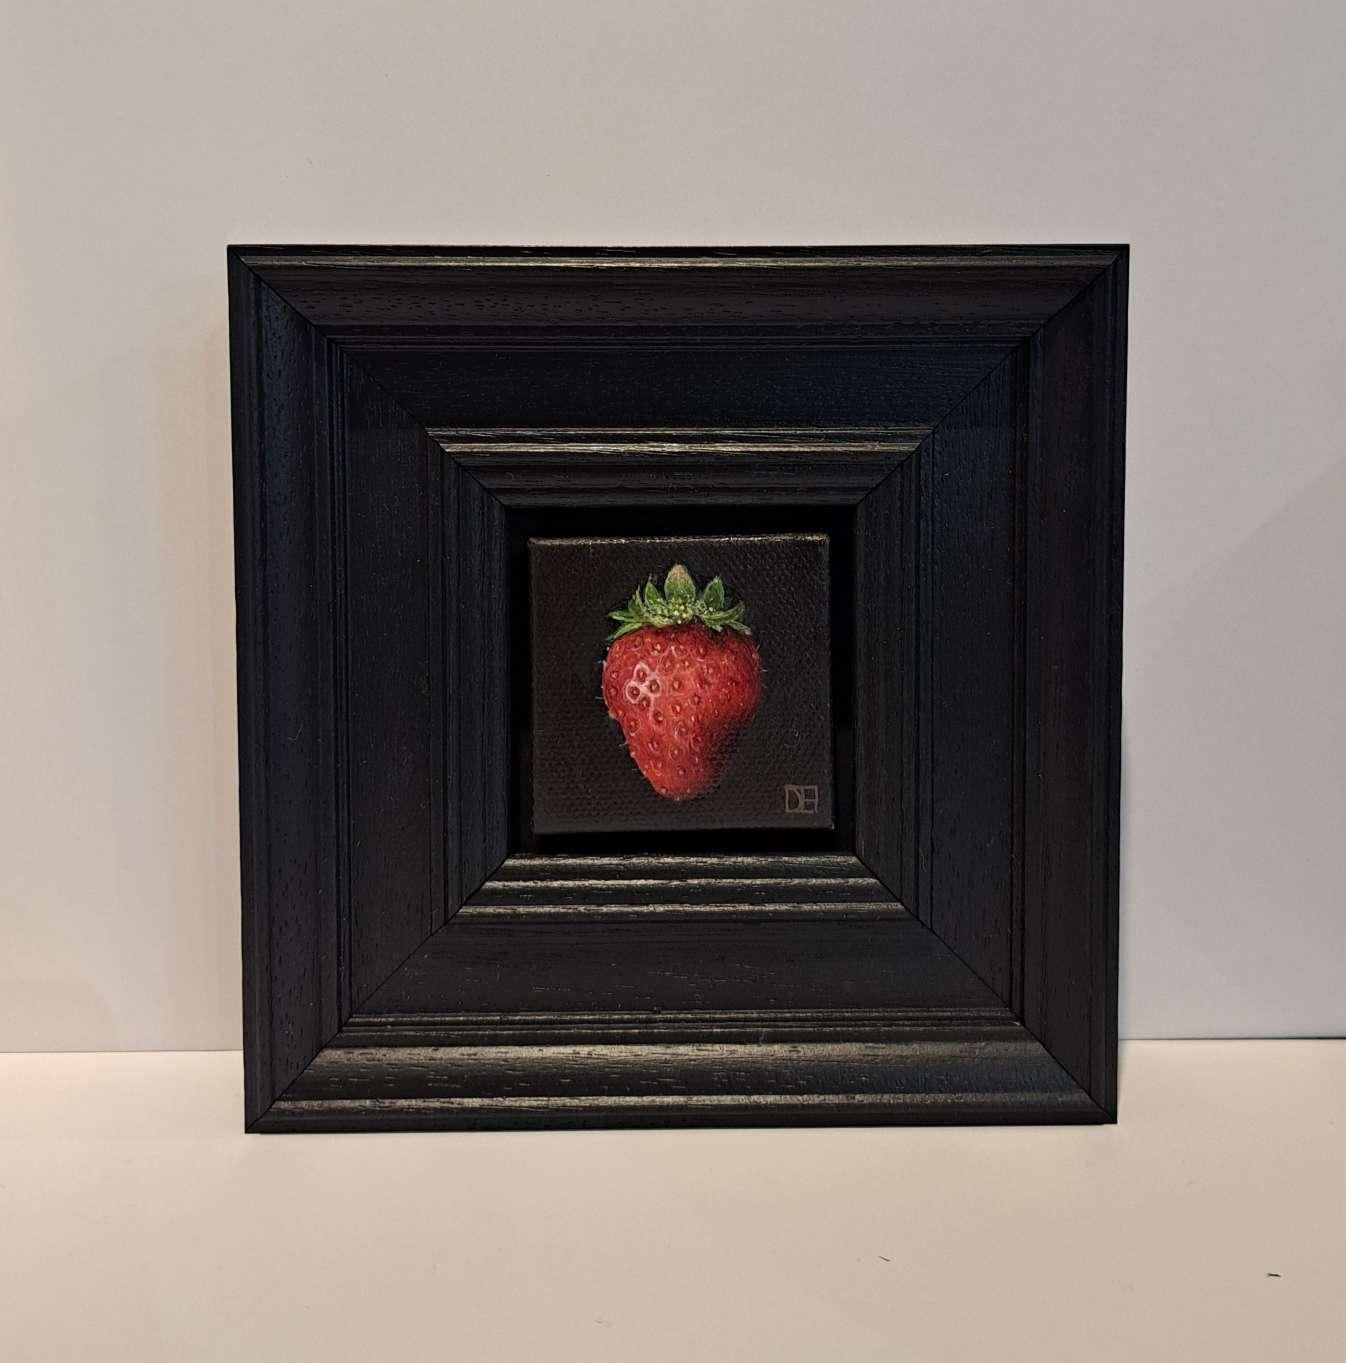 Pocket Crimson Strawberry 2 c is an original oil painting by Dani Humberstone as part of her Pocket Painting series featuring small scale realistic oil paintings, with a nod to baroque still life painting. The paintings are set in a black wood